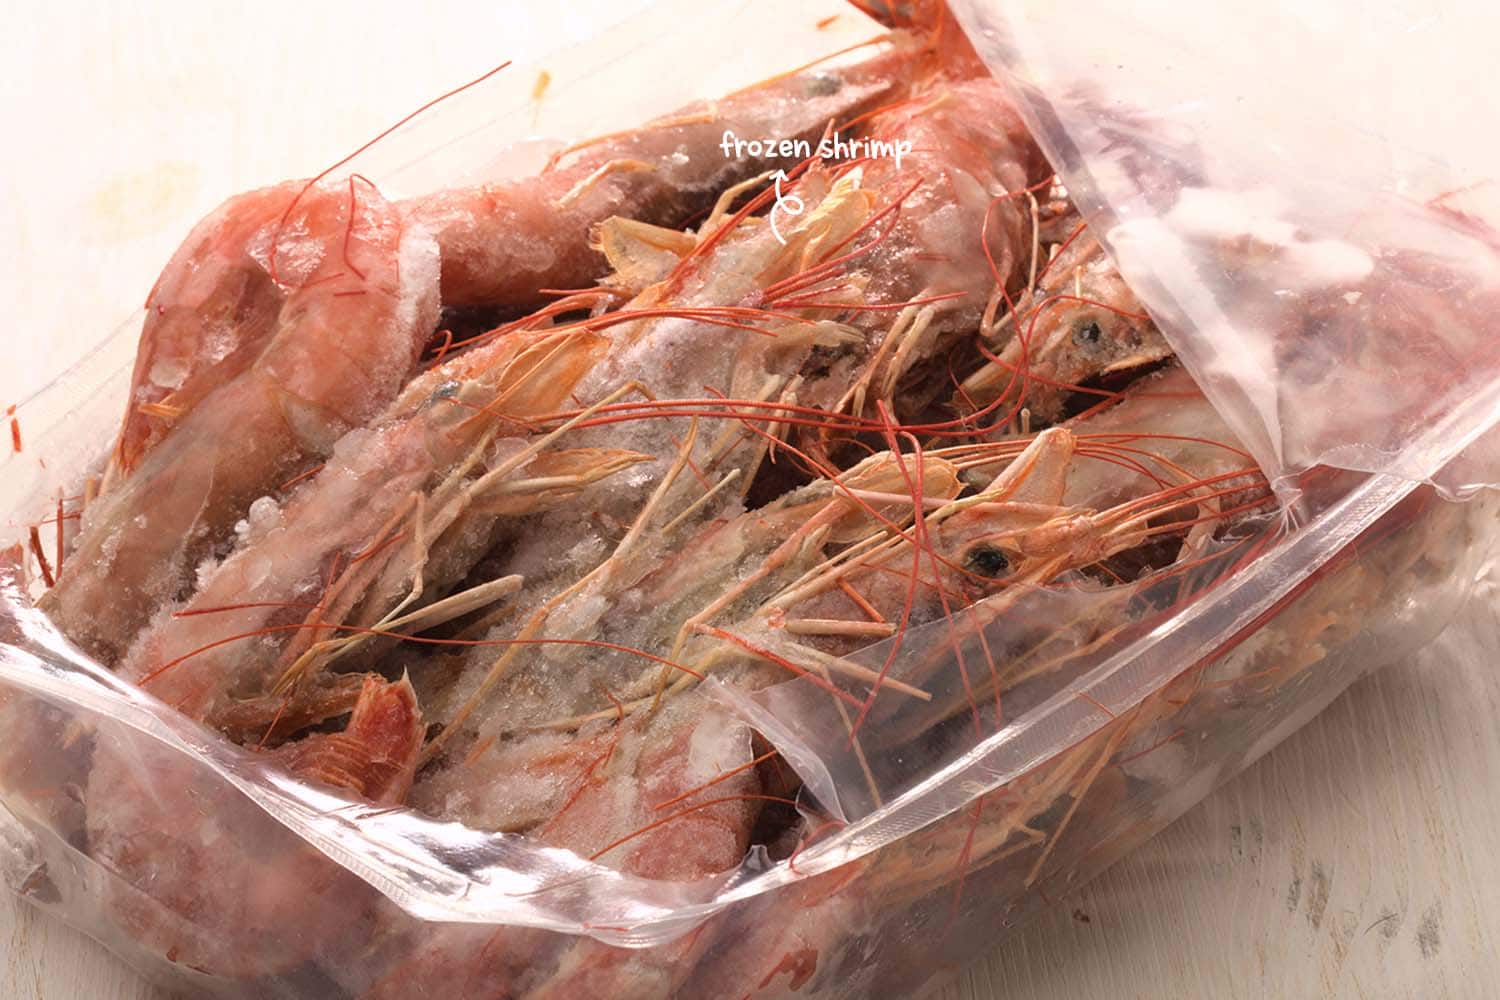 Freezer Burn Shrimp and How to Prevent it | The Fork Bite Frozen Shrimp Can Be Defrosted At What Water Temperature